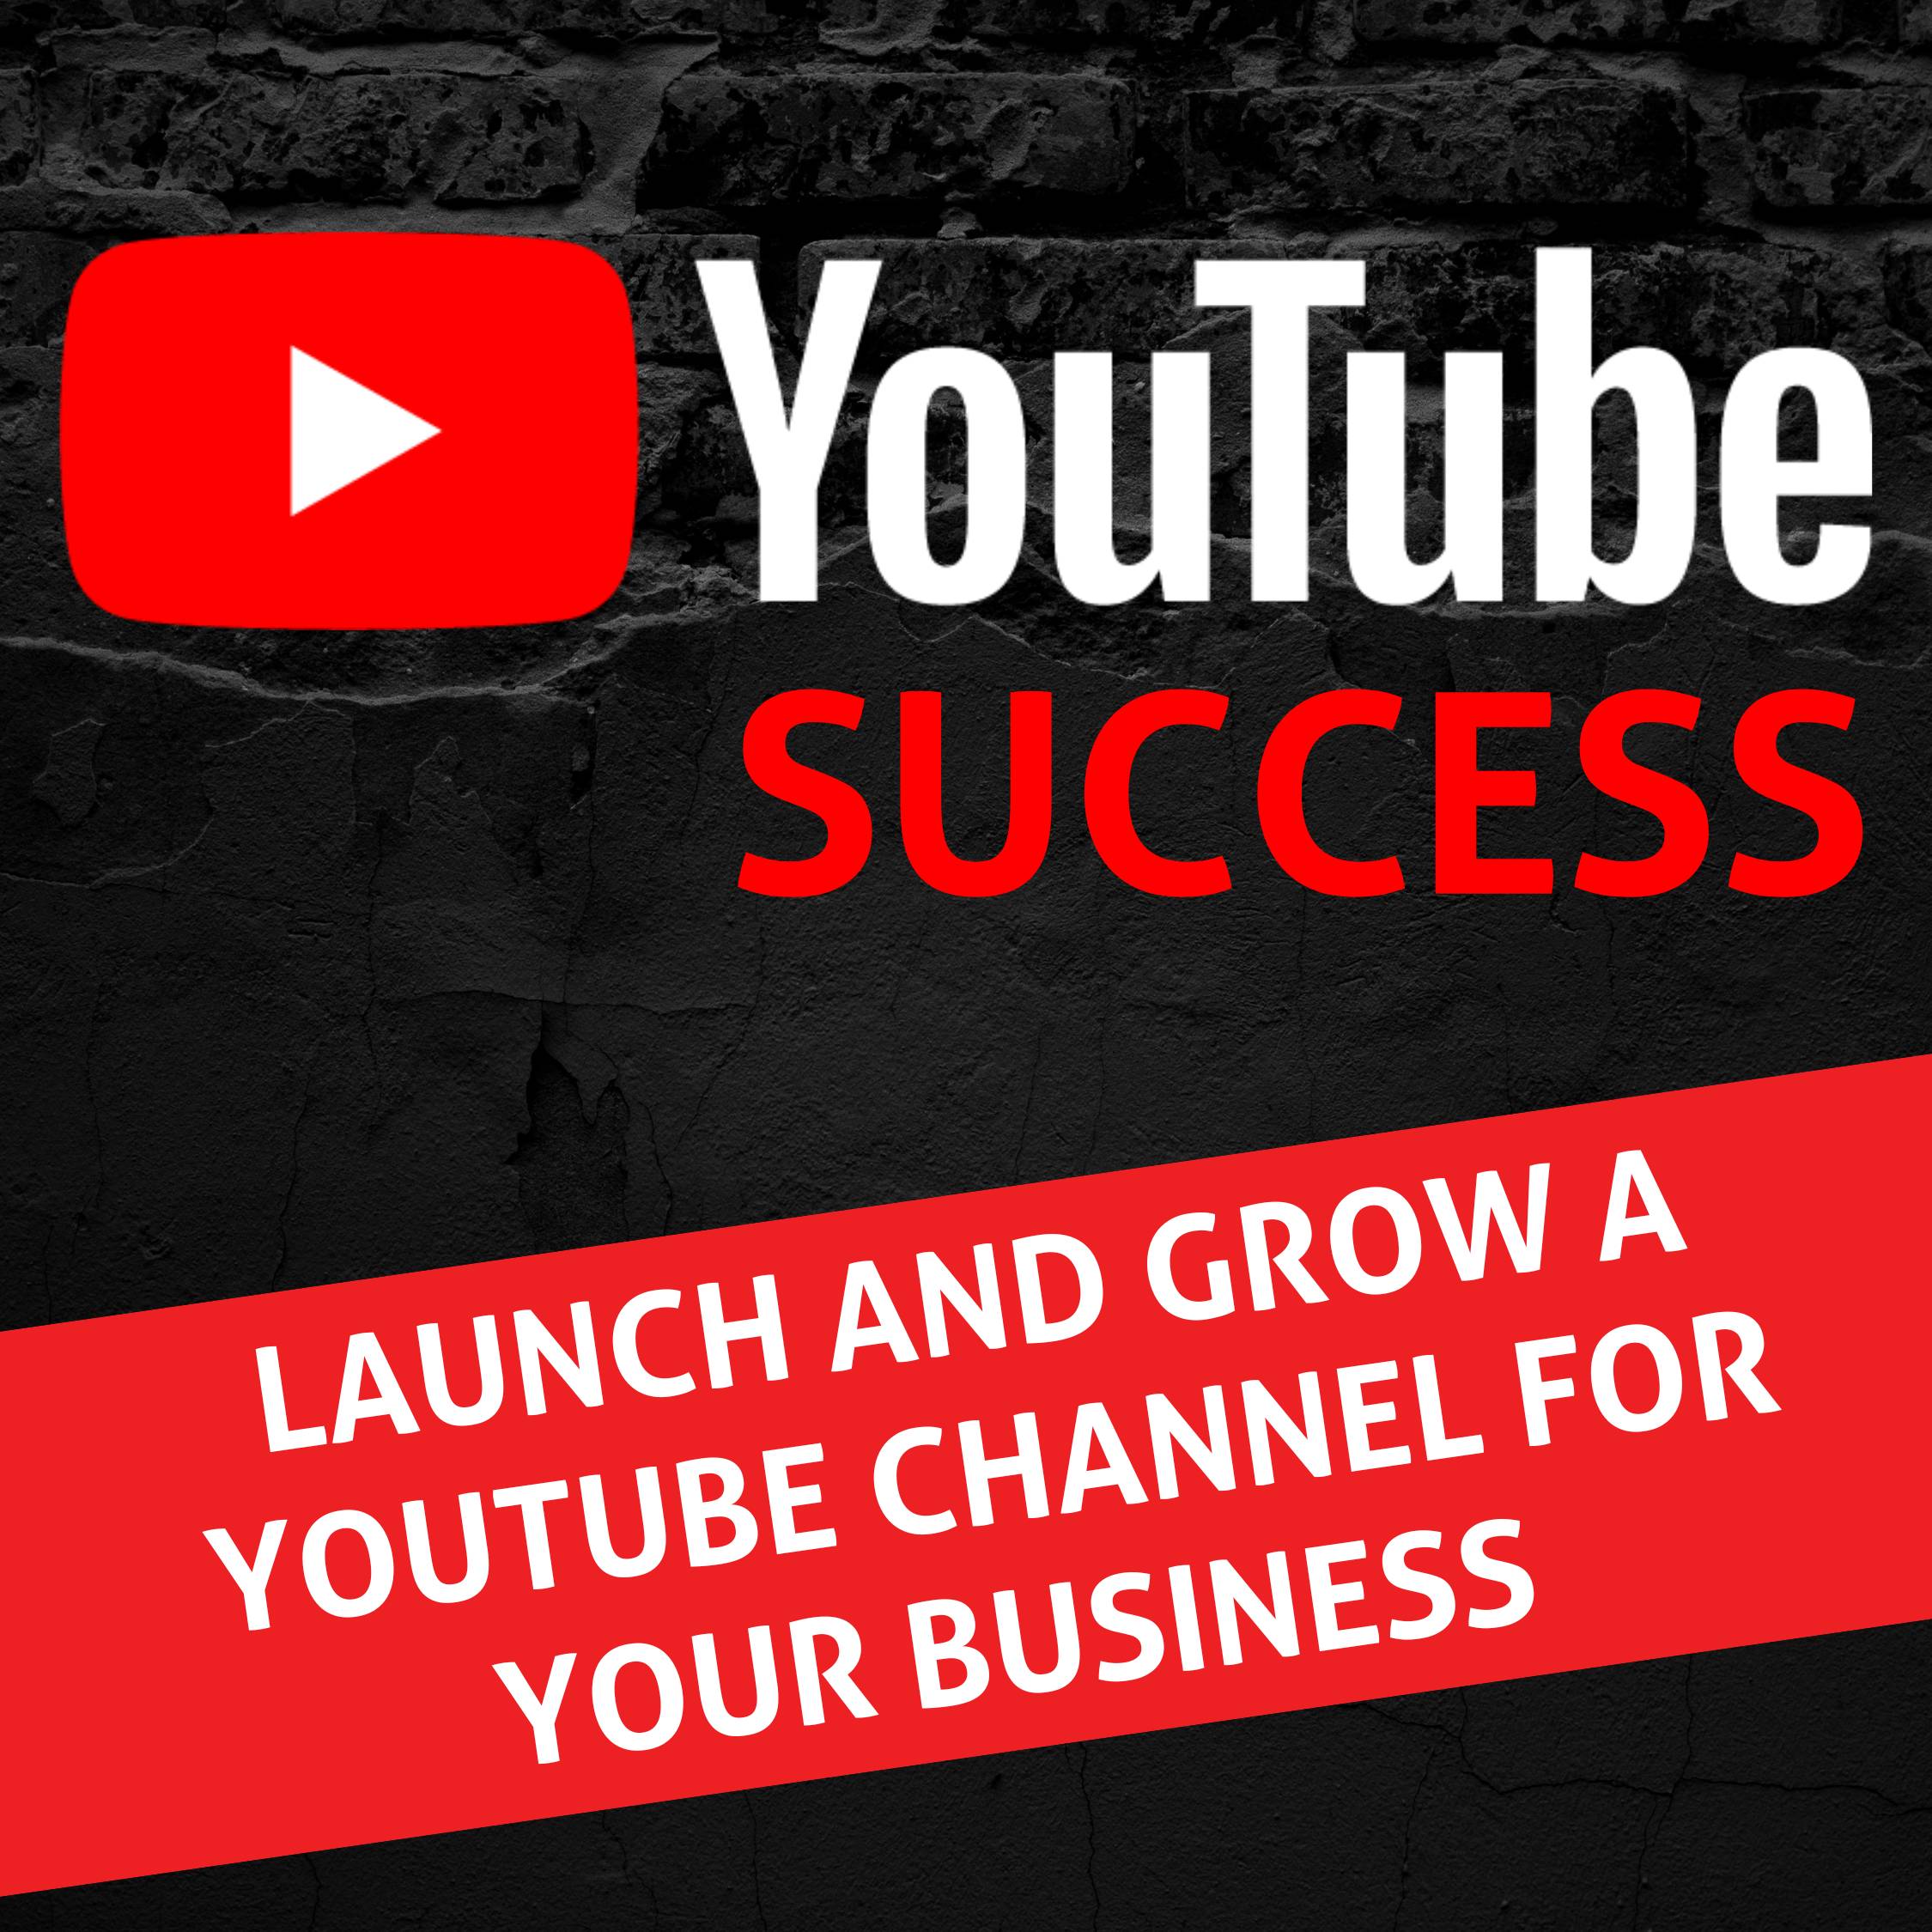 Artwork for YouTube Success - YouTube for Business & YouTube Growth, Video Marketing